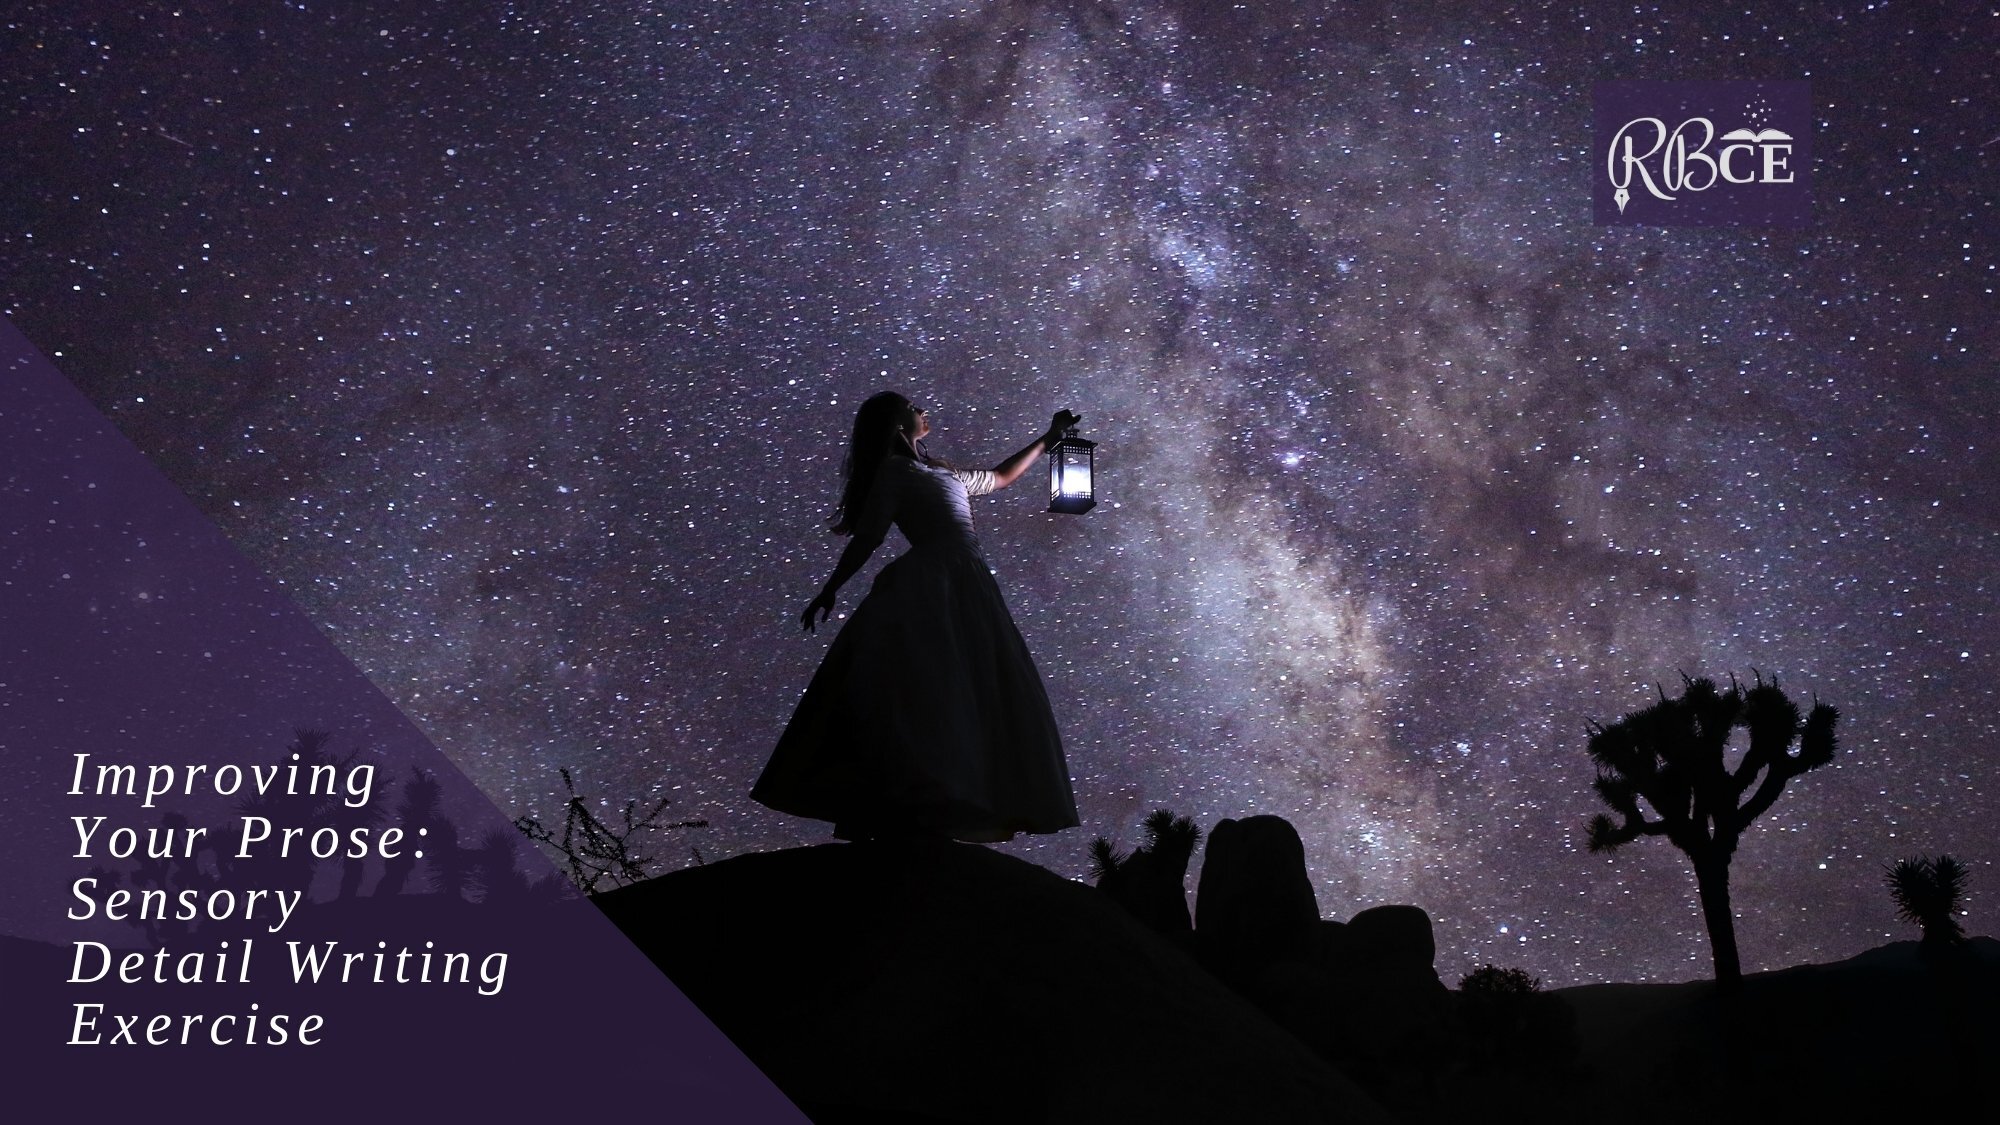 silhouette of woman holding lantern on a hill with starry sky. "Improving Your Prose: Sensory Detail Writing Exercise" in the corner